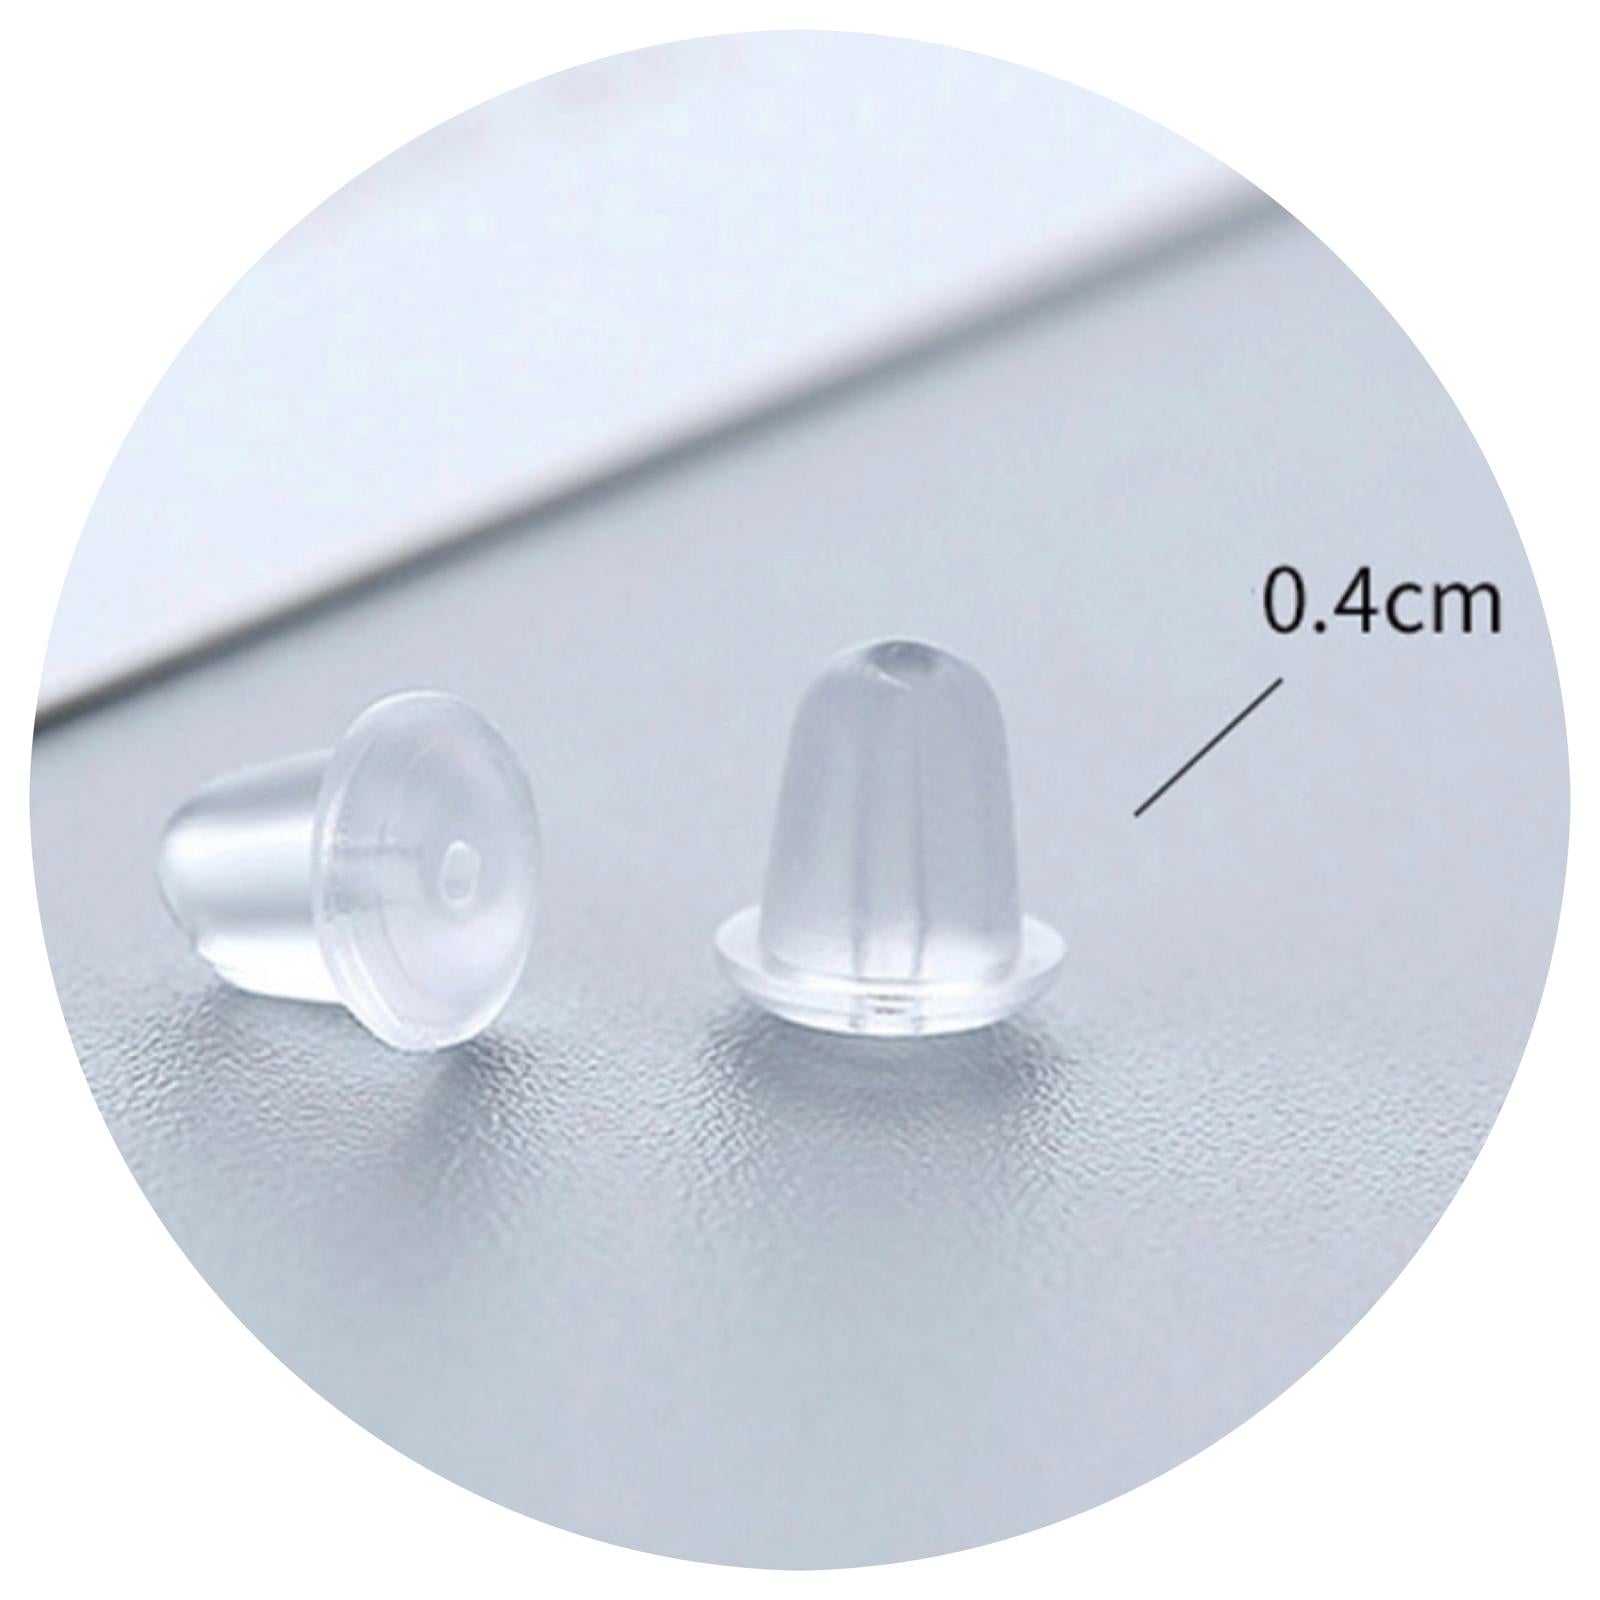 Clear Silicone Earring Backs – Our Spare Change